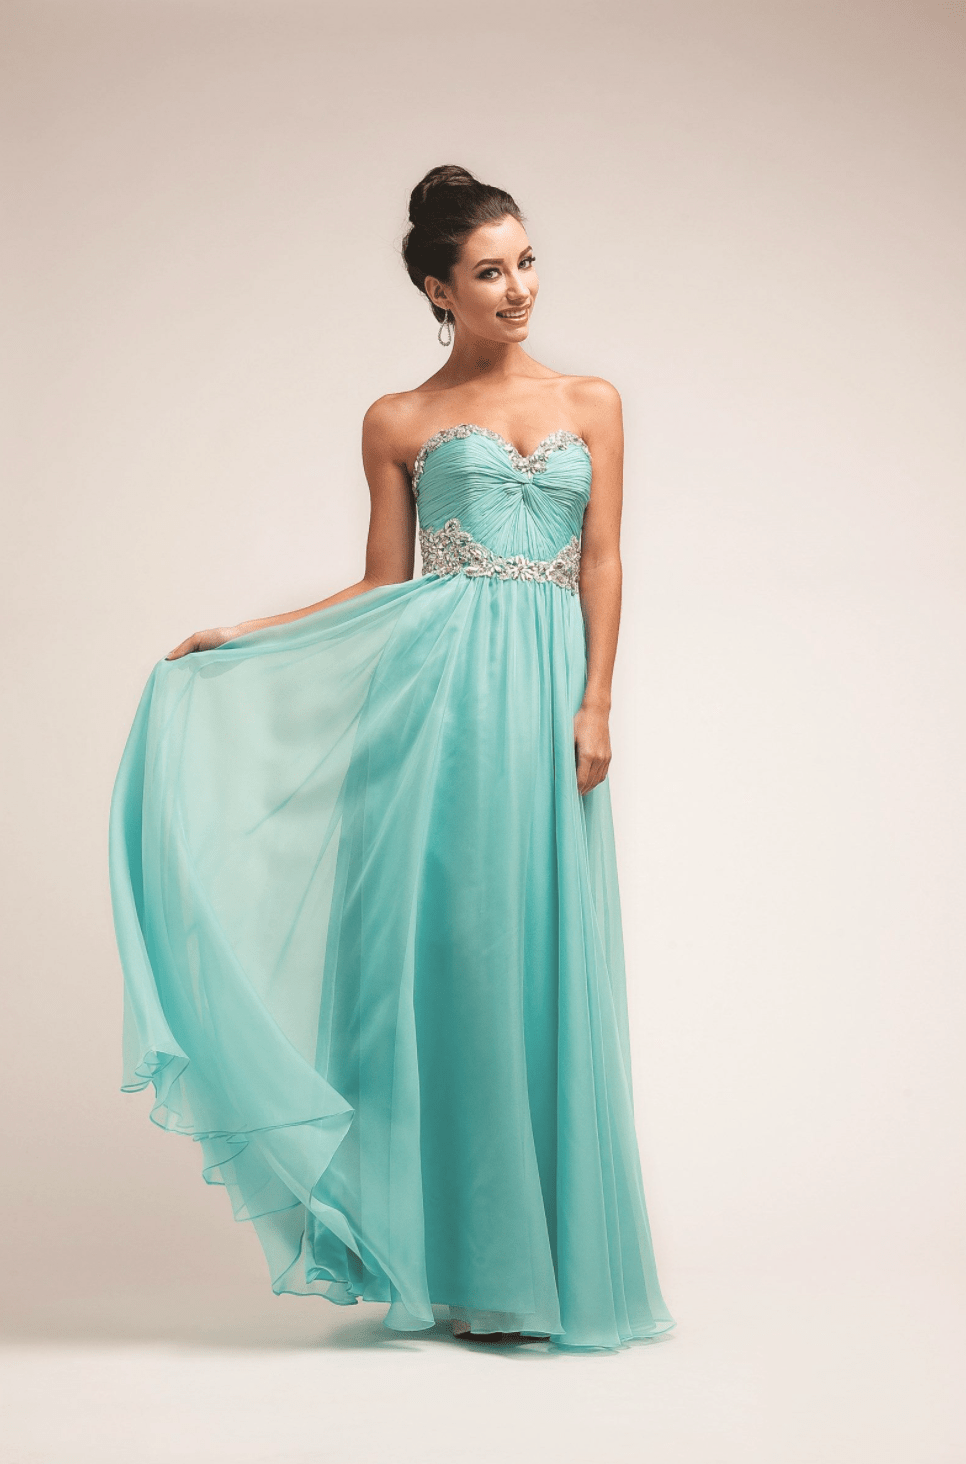 Mint Green Crystal Chiffon Dress by Ladivine - NORMA REED